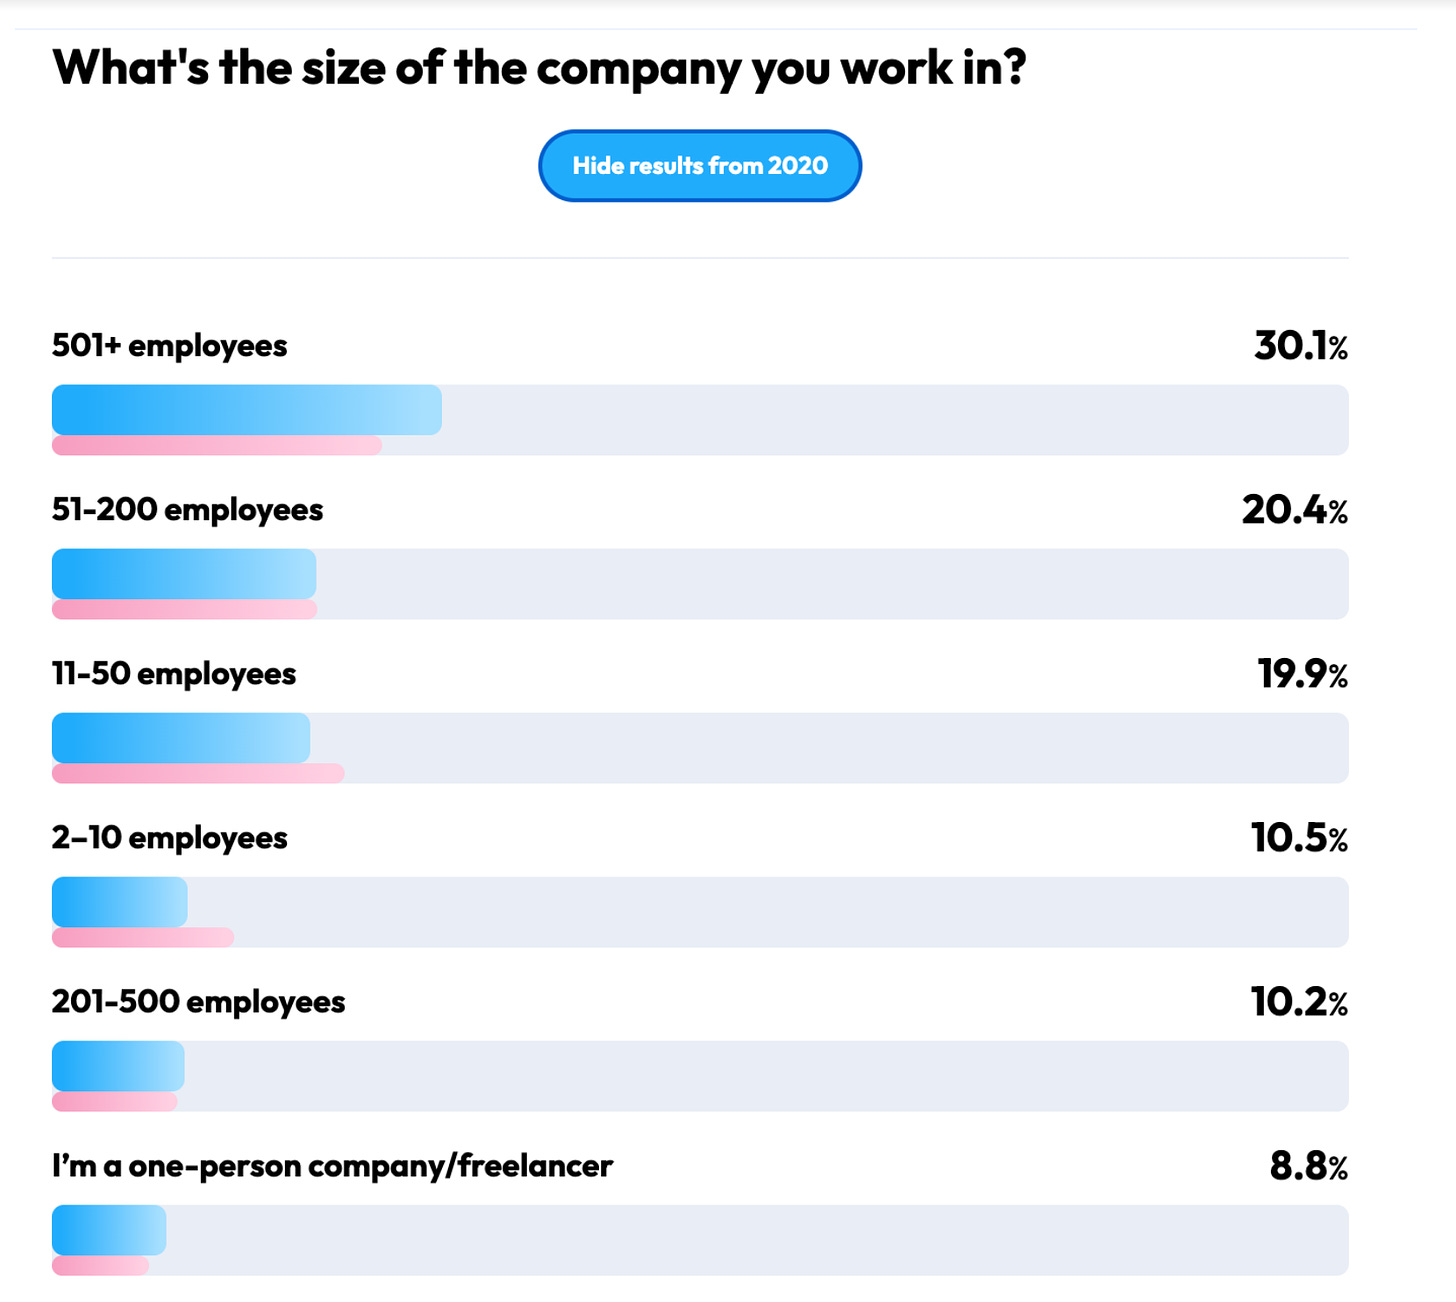 Working within larger companies is becoming somewhat more common. Blue bars: 2022. Red bars: 2020.